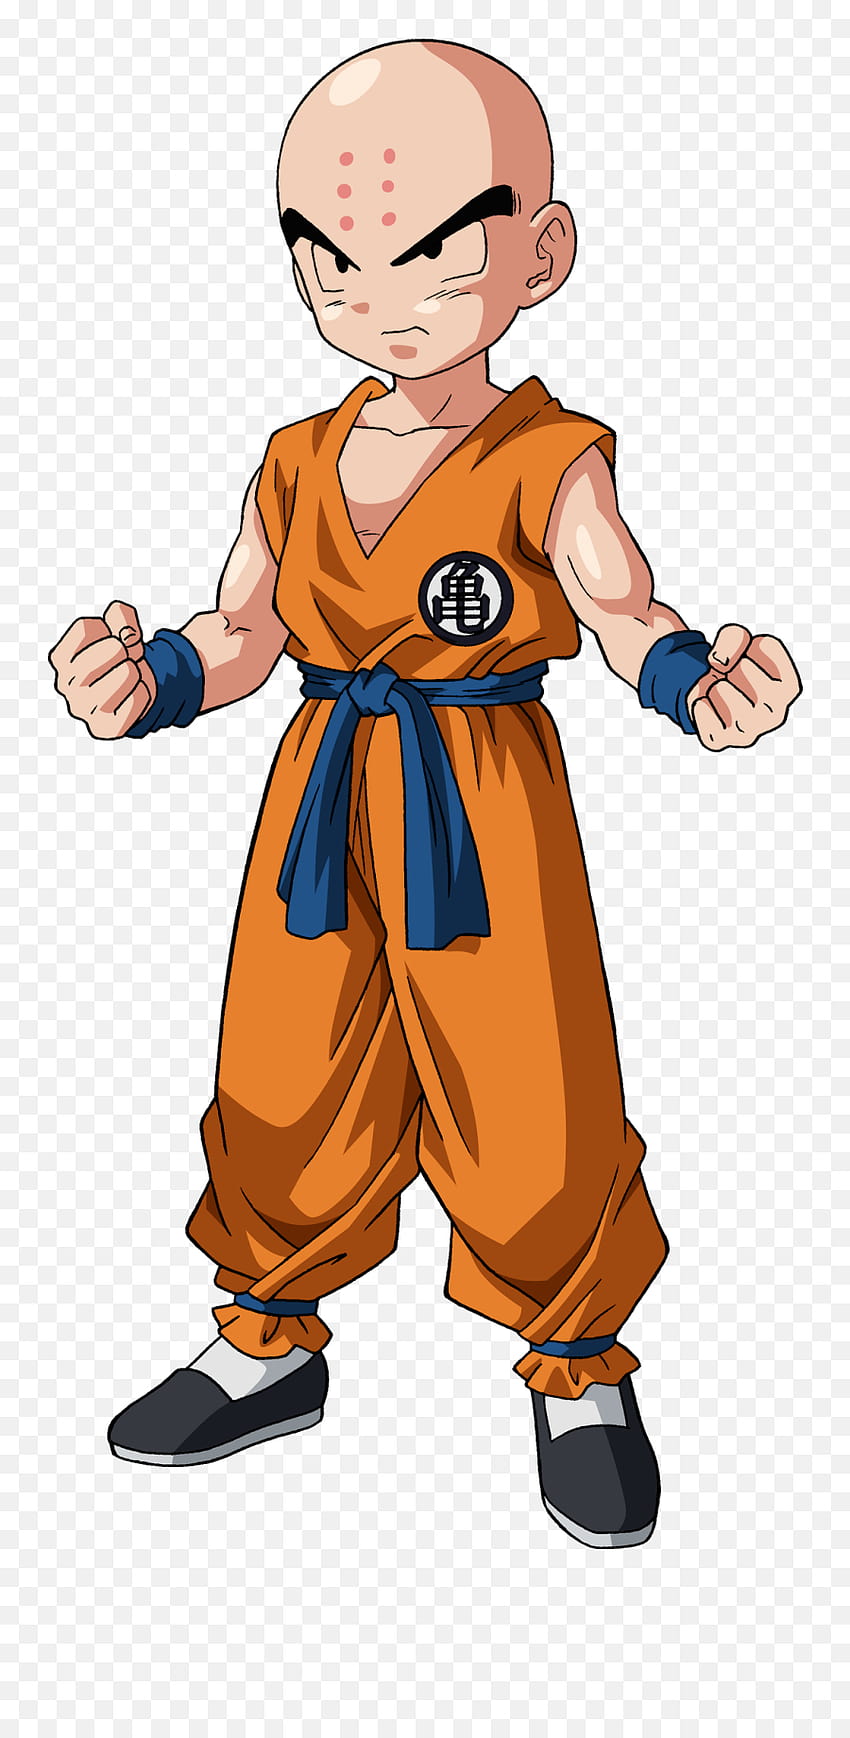 Download Dragon Ball Z Characters Image HQ PNG Image